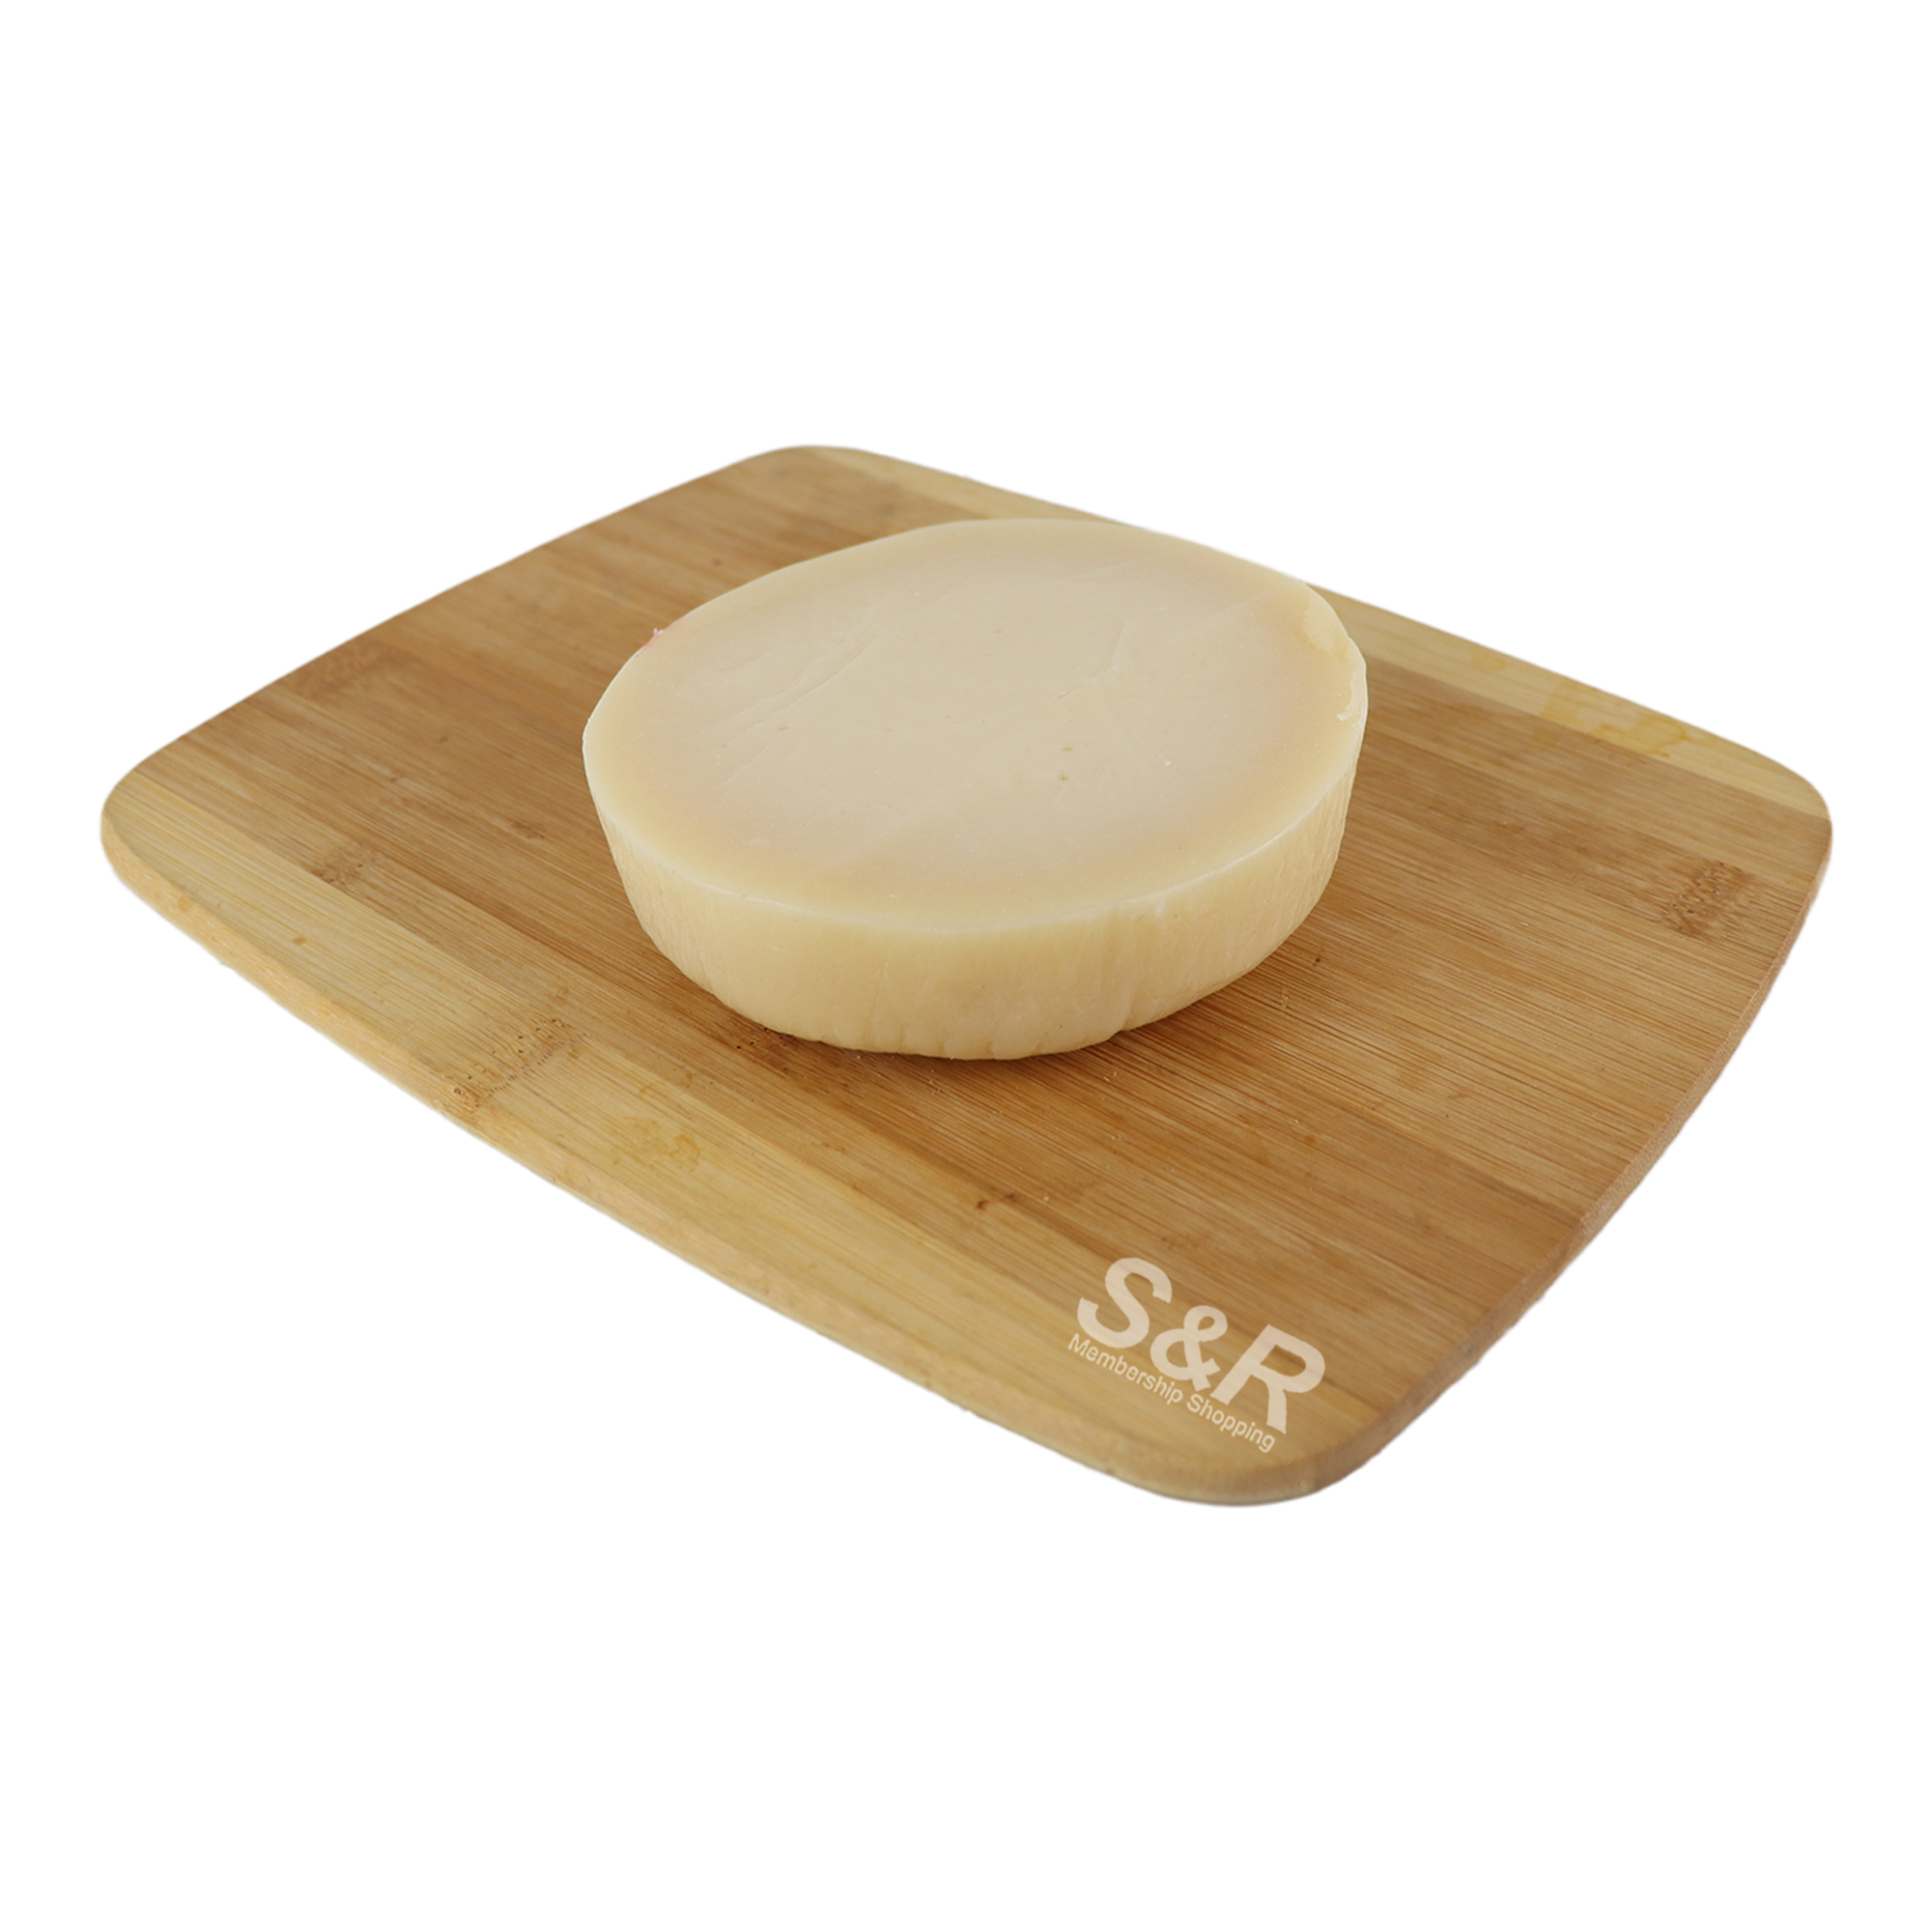 S&R Provolone Picante Cheese approx. 750g